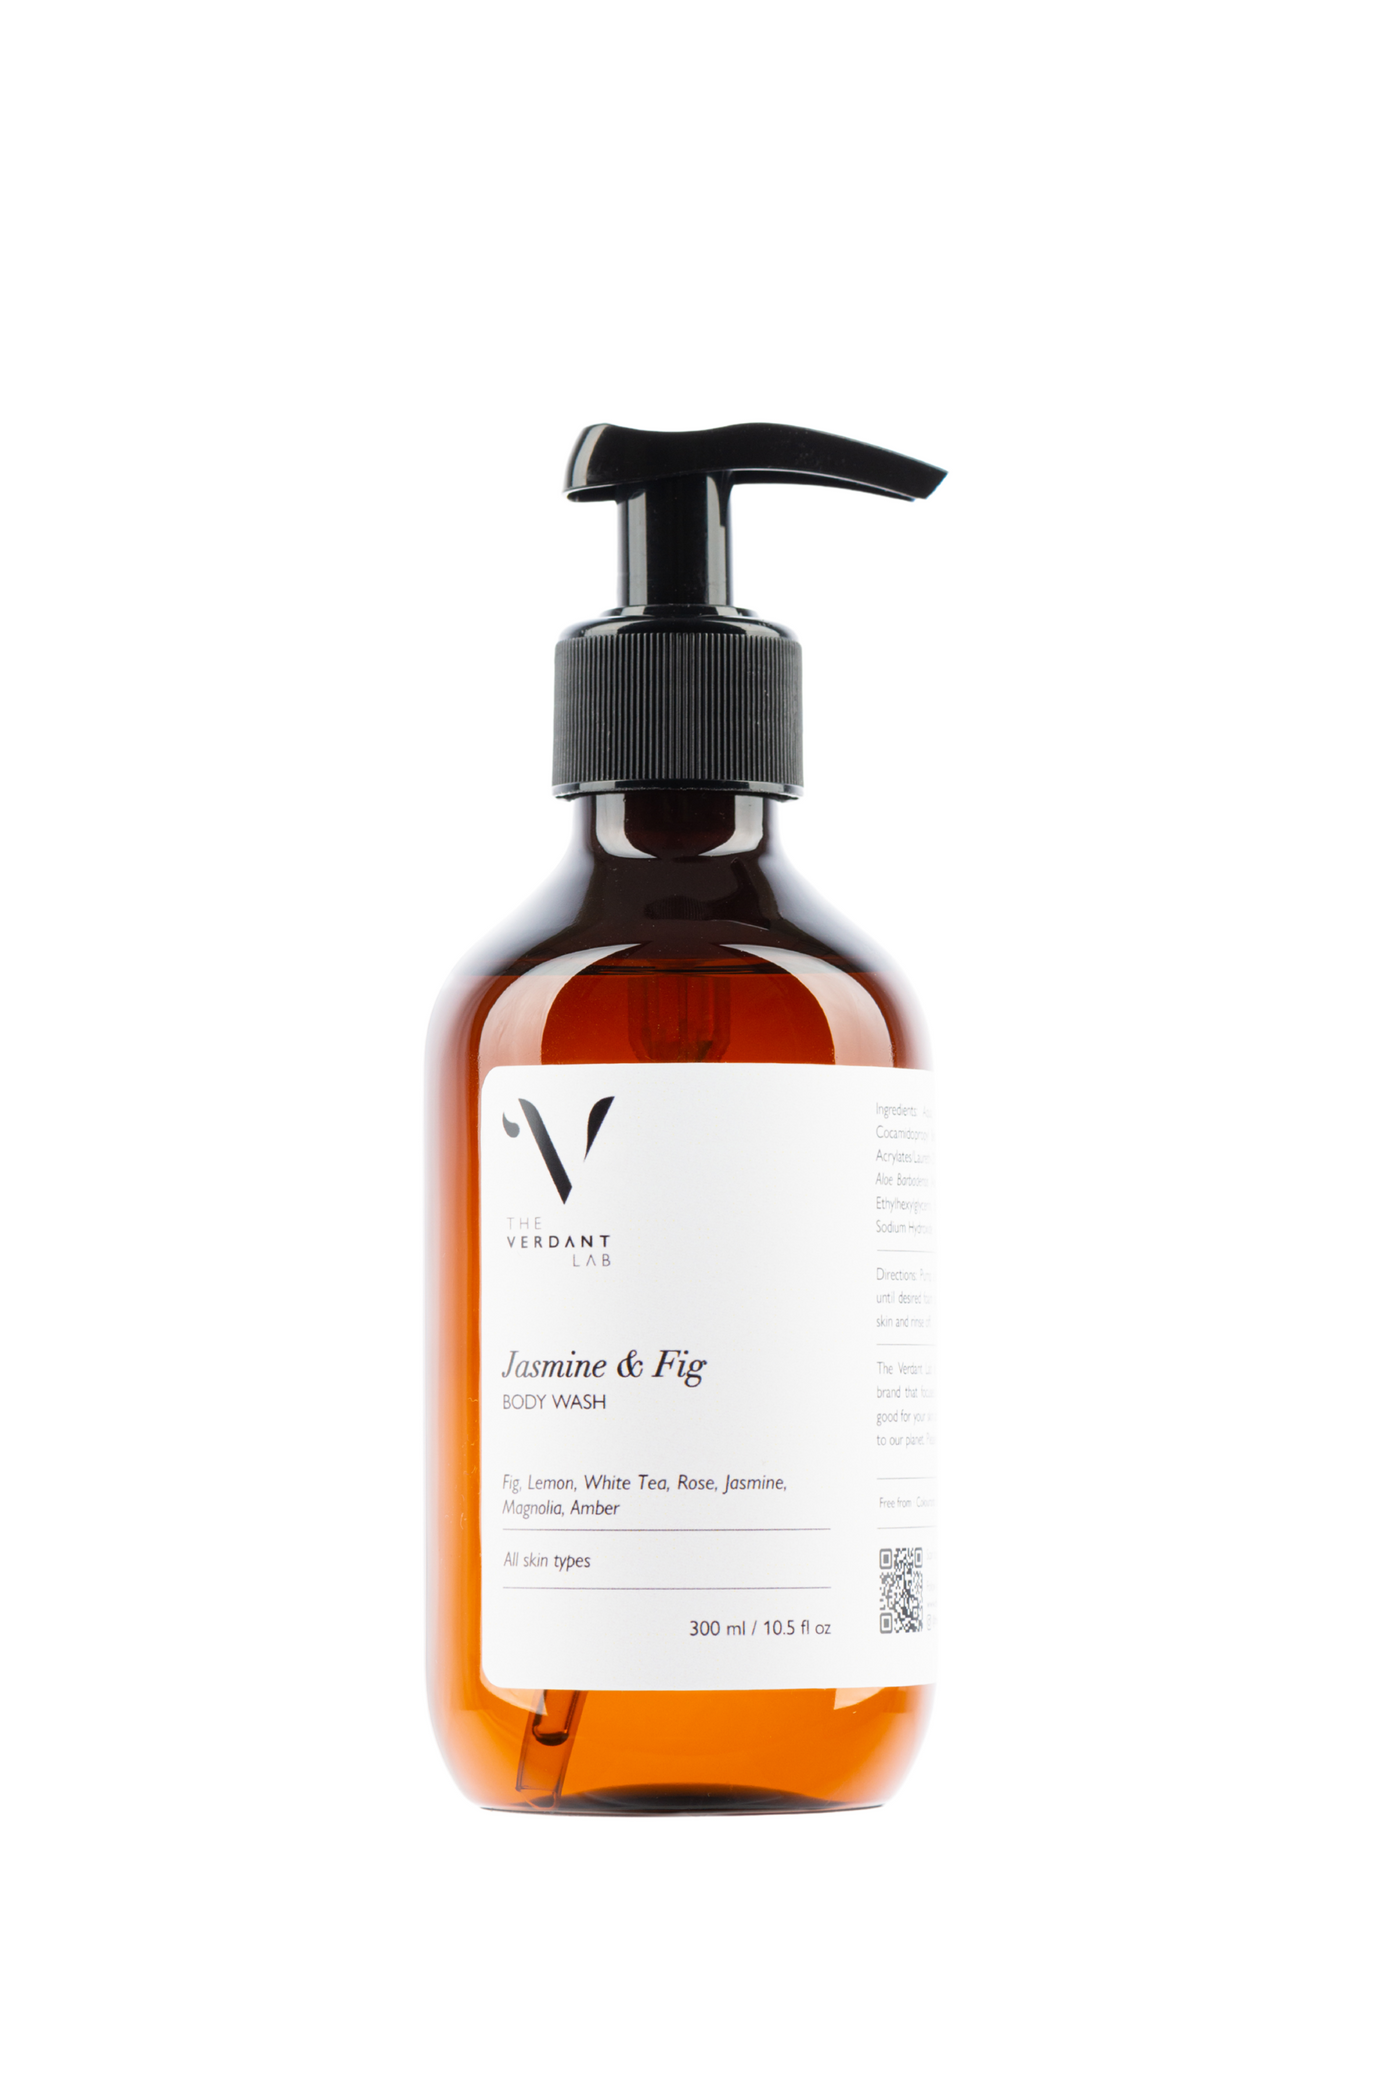 The Verdant Lab Body Wash in Jasmine & Fig, available on ZERRIN with free Singapore shipping